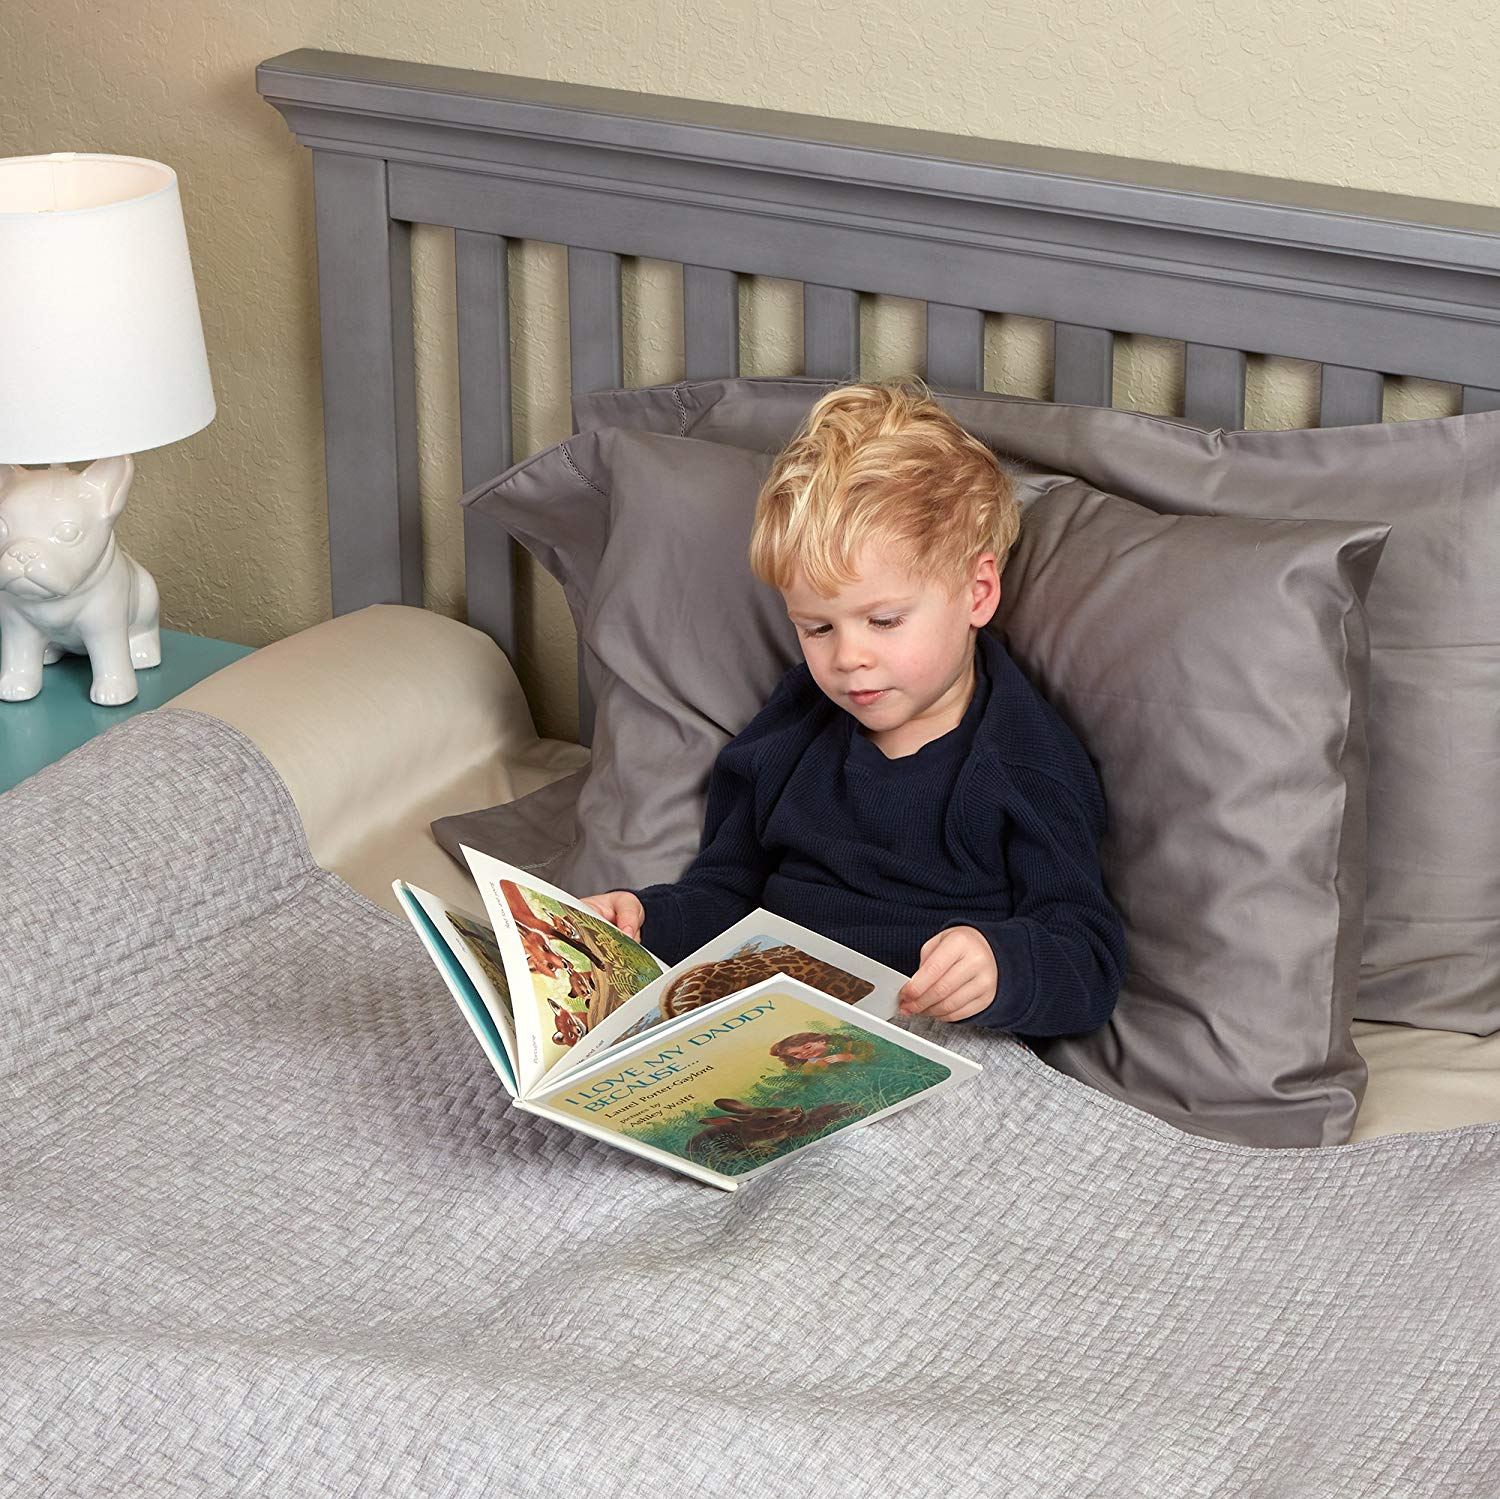 high bed rails for toddlers